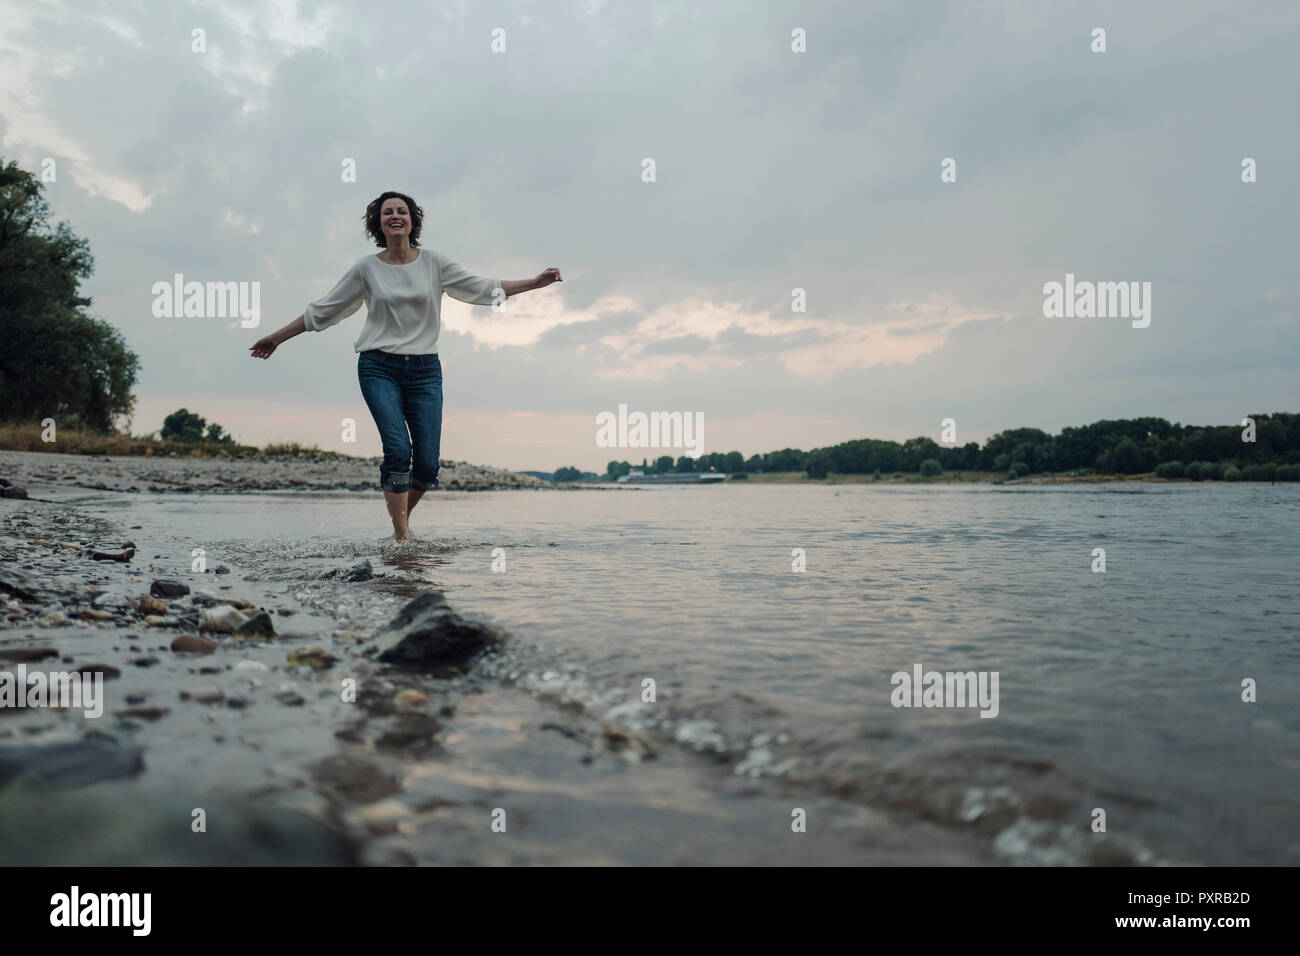 Laughing woman running at the riverside Stock Photo